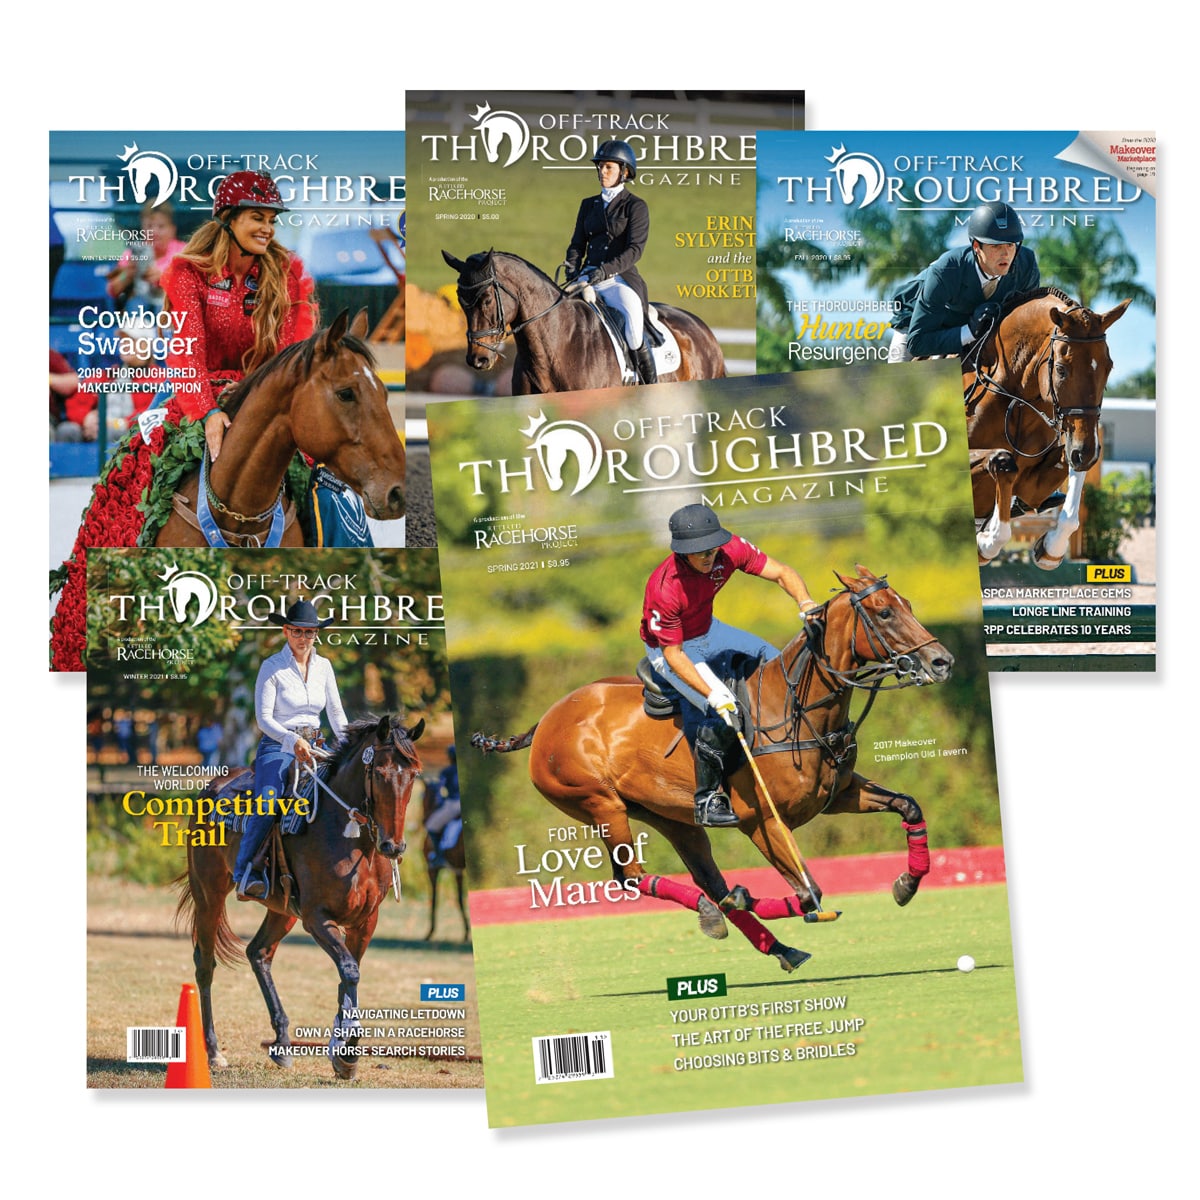 Featured image for “Off-Track Thoroughbred Magazine Annual Subscription”